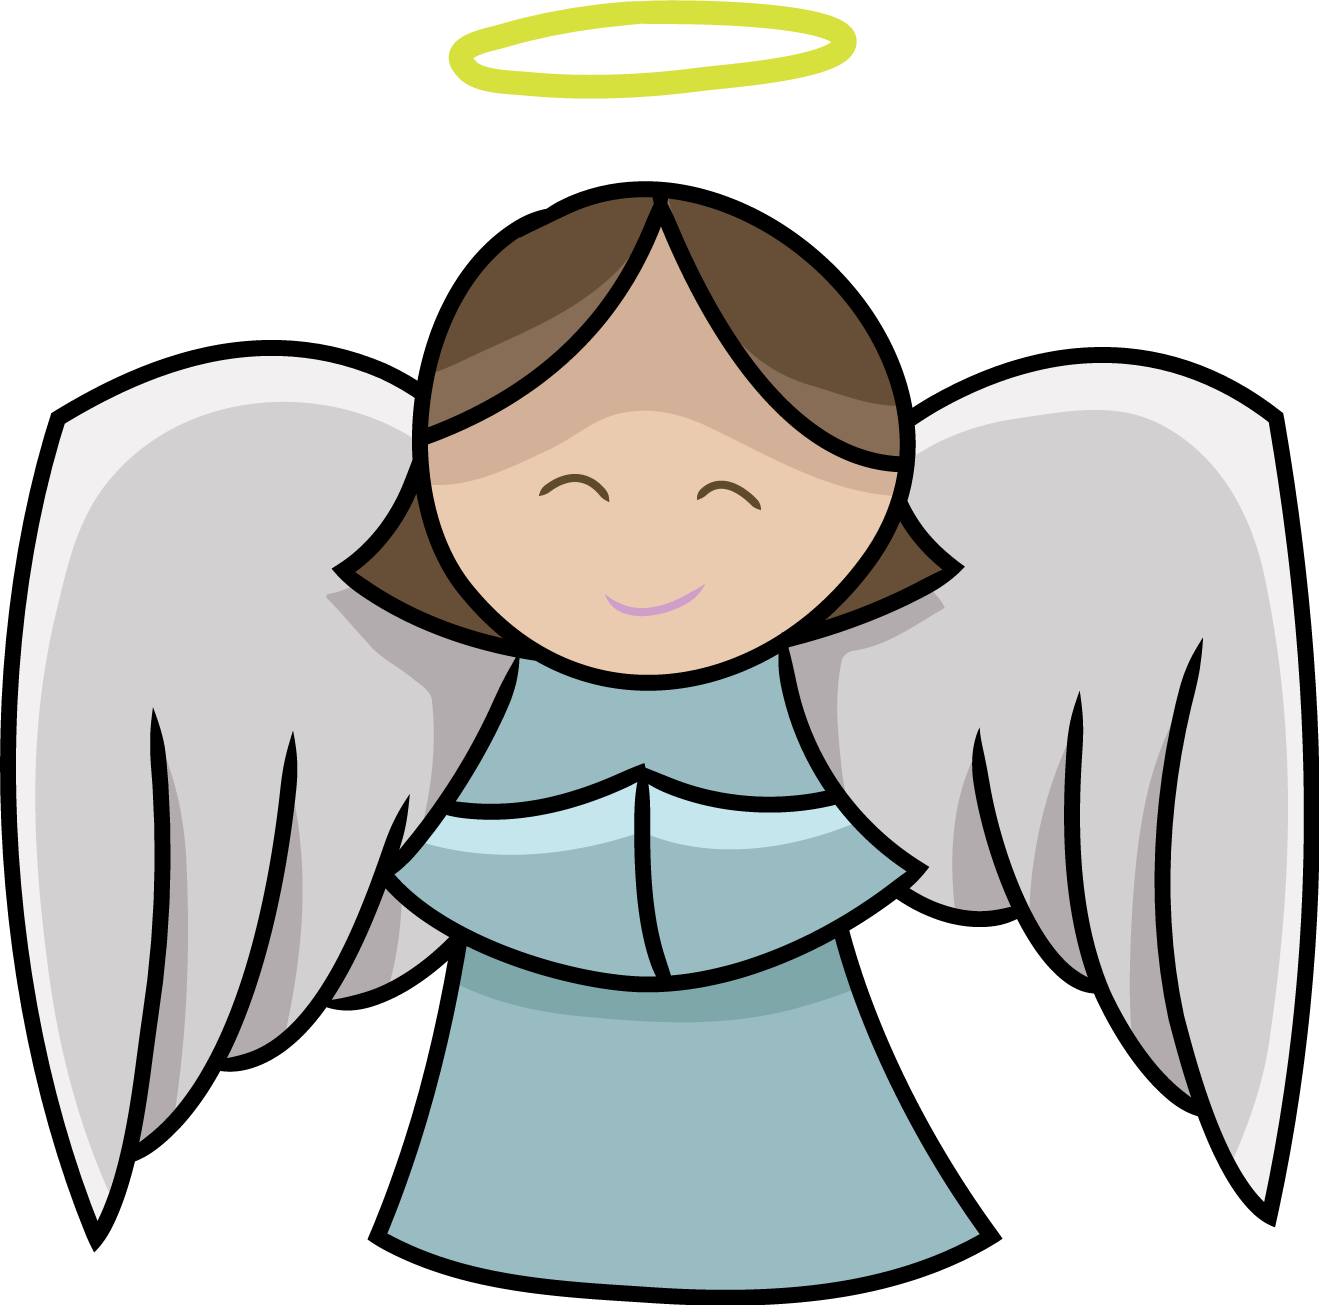 'Add a Heavenly Touch to Your Designs with Cute Angel Cliparts'